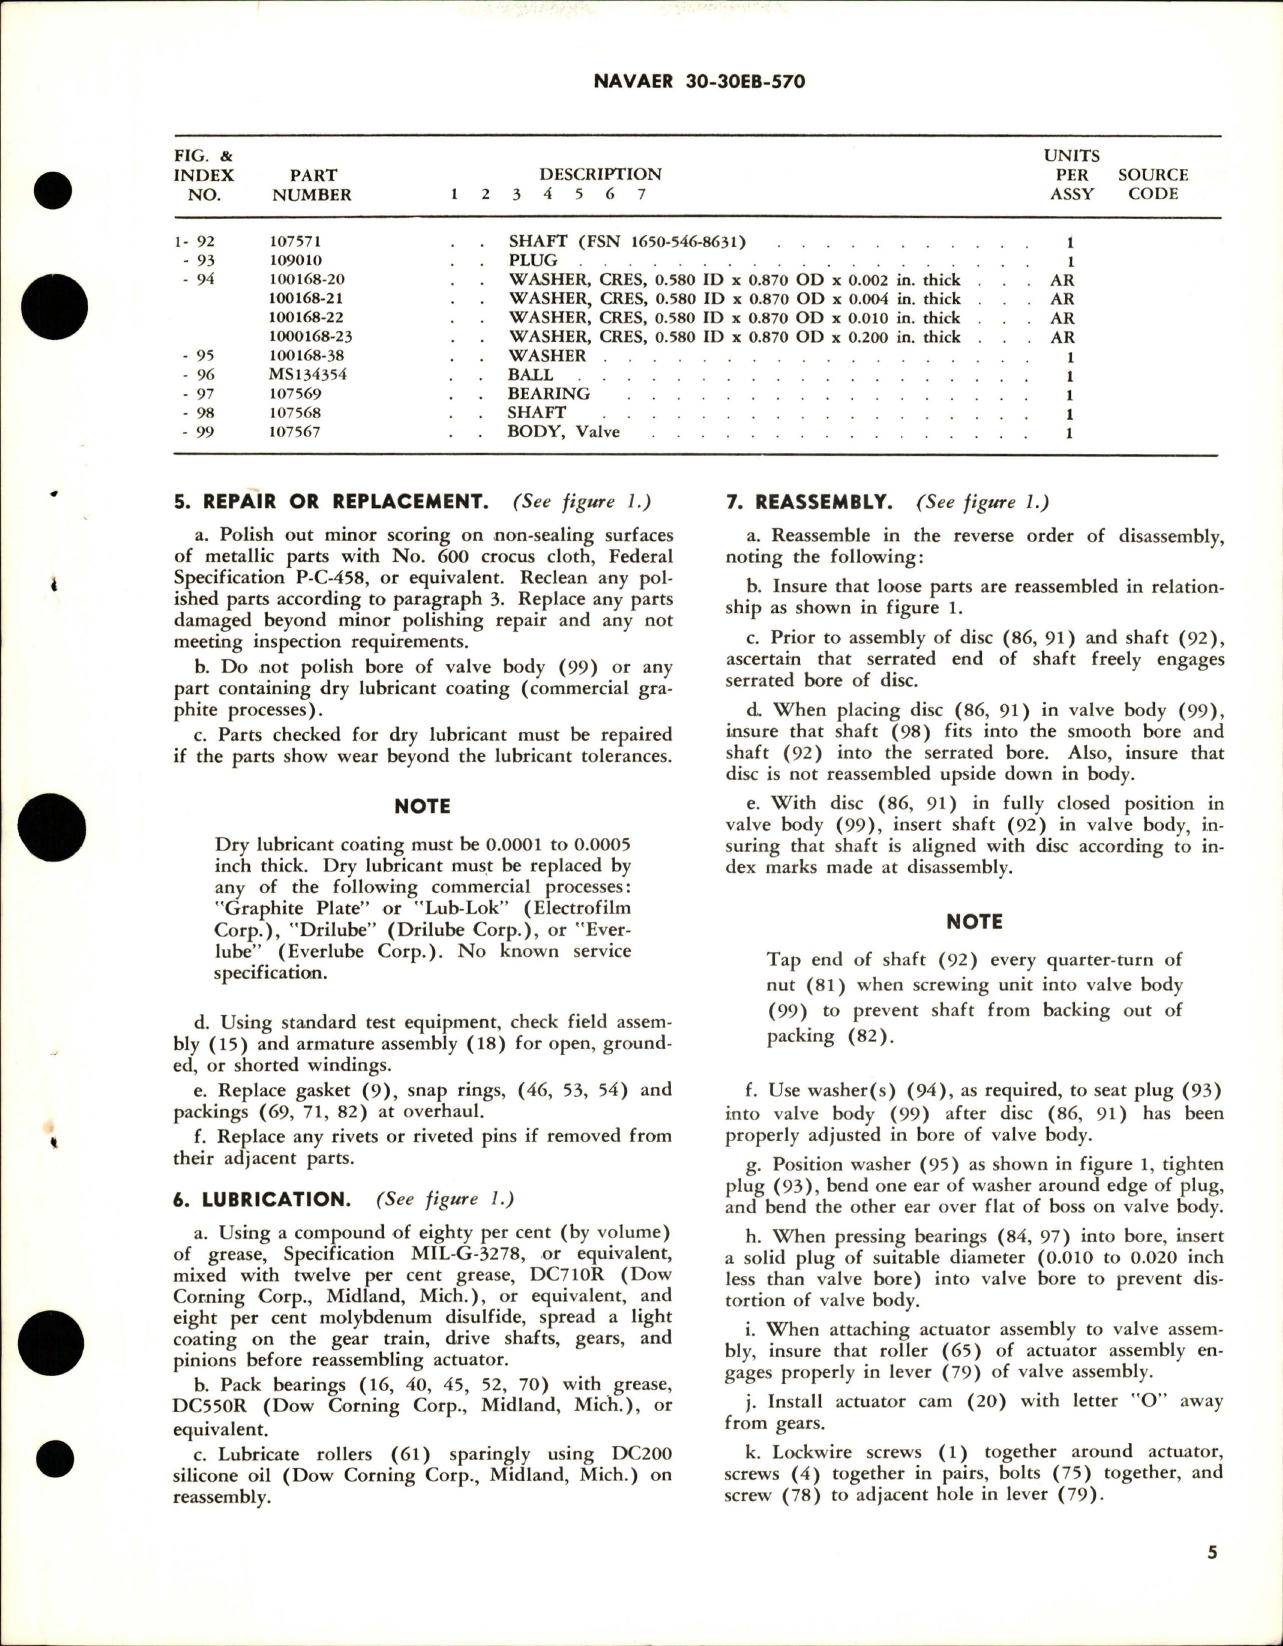 Sample page 5 from AirCorps Library document: Overhaul Instructions with Parts for Motor Actuated Butterfly Valve Assemblies - Part 105091 and 105091-1